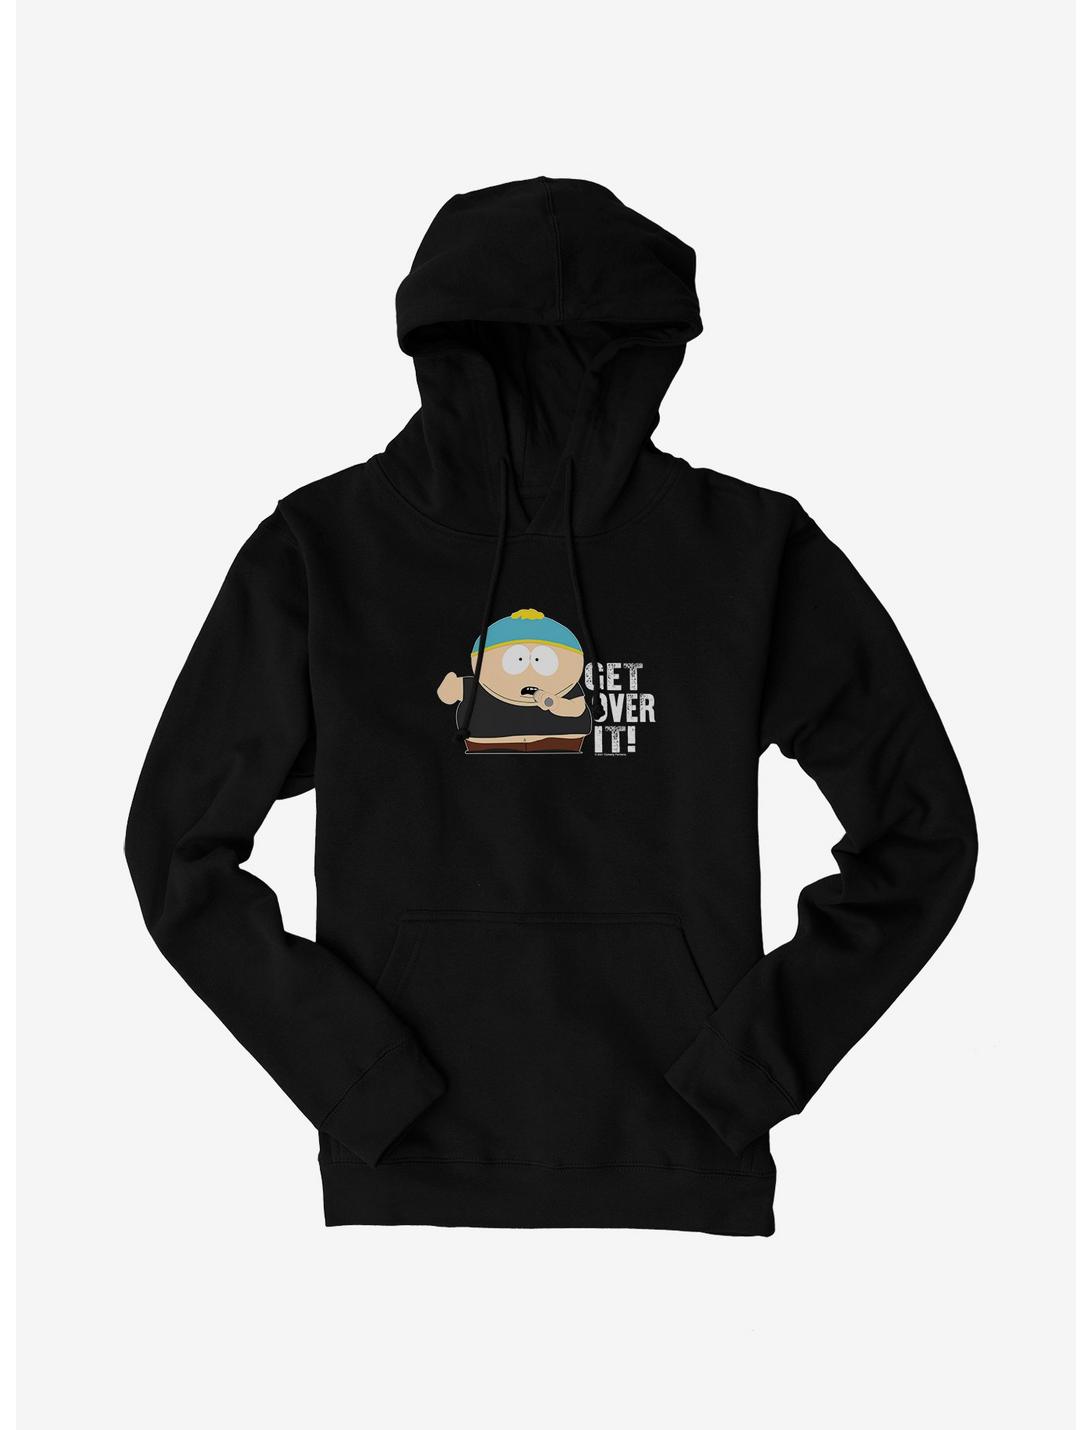 South Park Season Reference Cartman Over It Hoodie, , hi-res